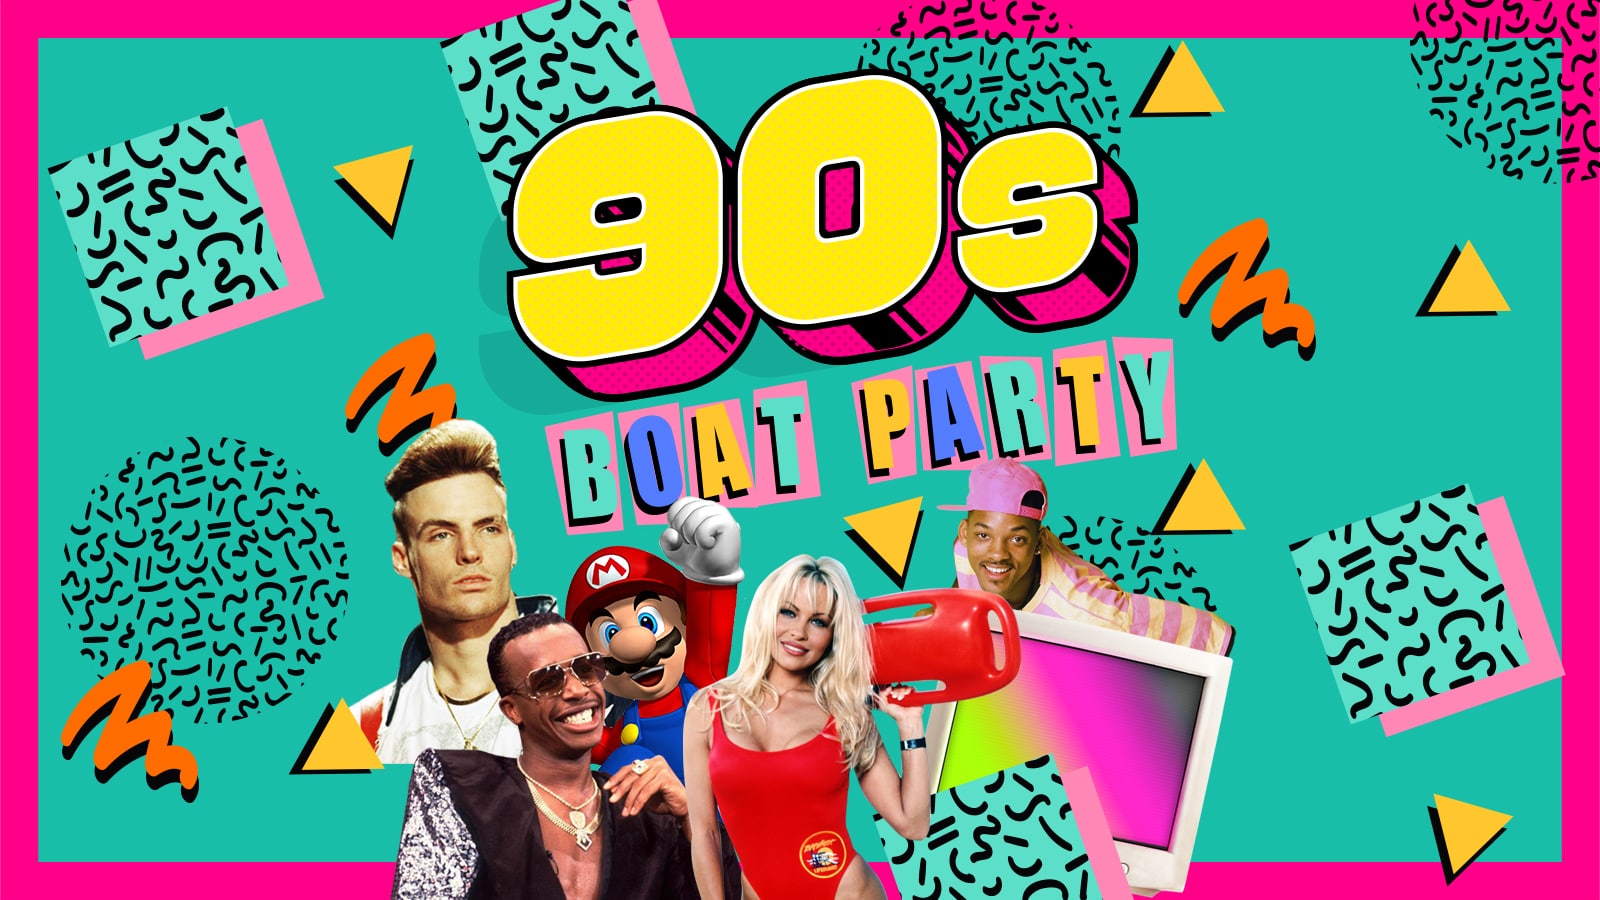 London 90s Boat Party with FREE PopWorld After Party! event (London 90s Boat Party with FREE PopWorld After Party! at Crown Pier, London, ) hosted on the Vivus Quest Platform. Tickets available on vivushub.com